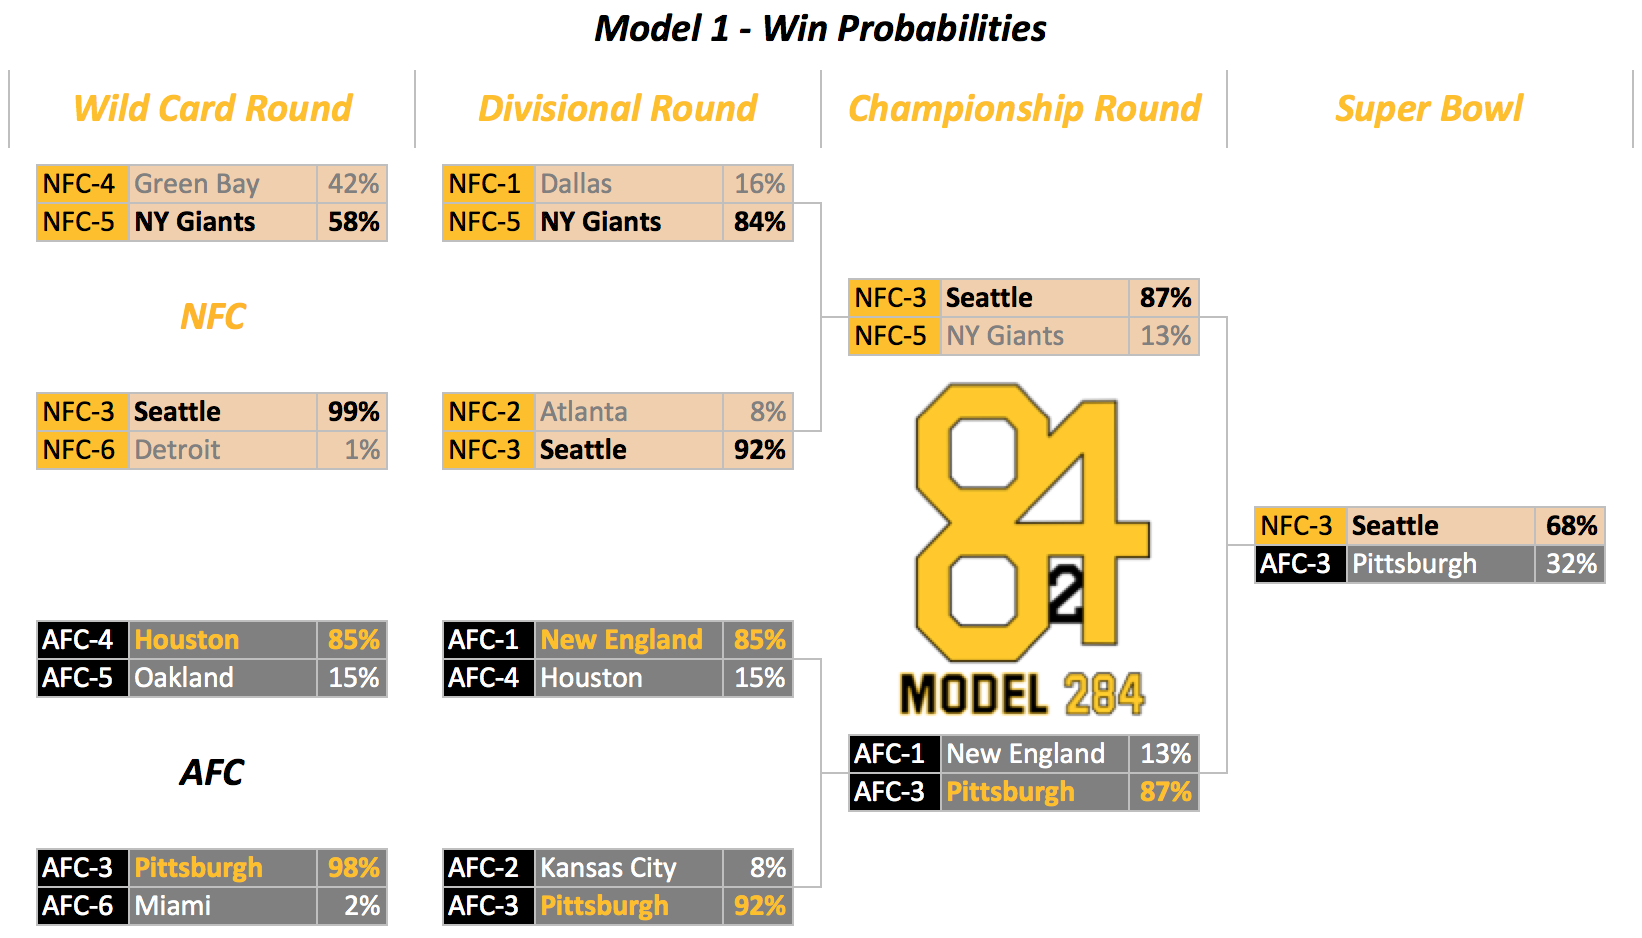 nfl 2022 playoff predictions